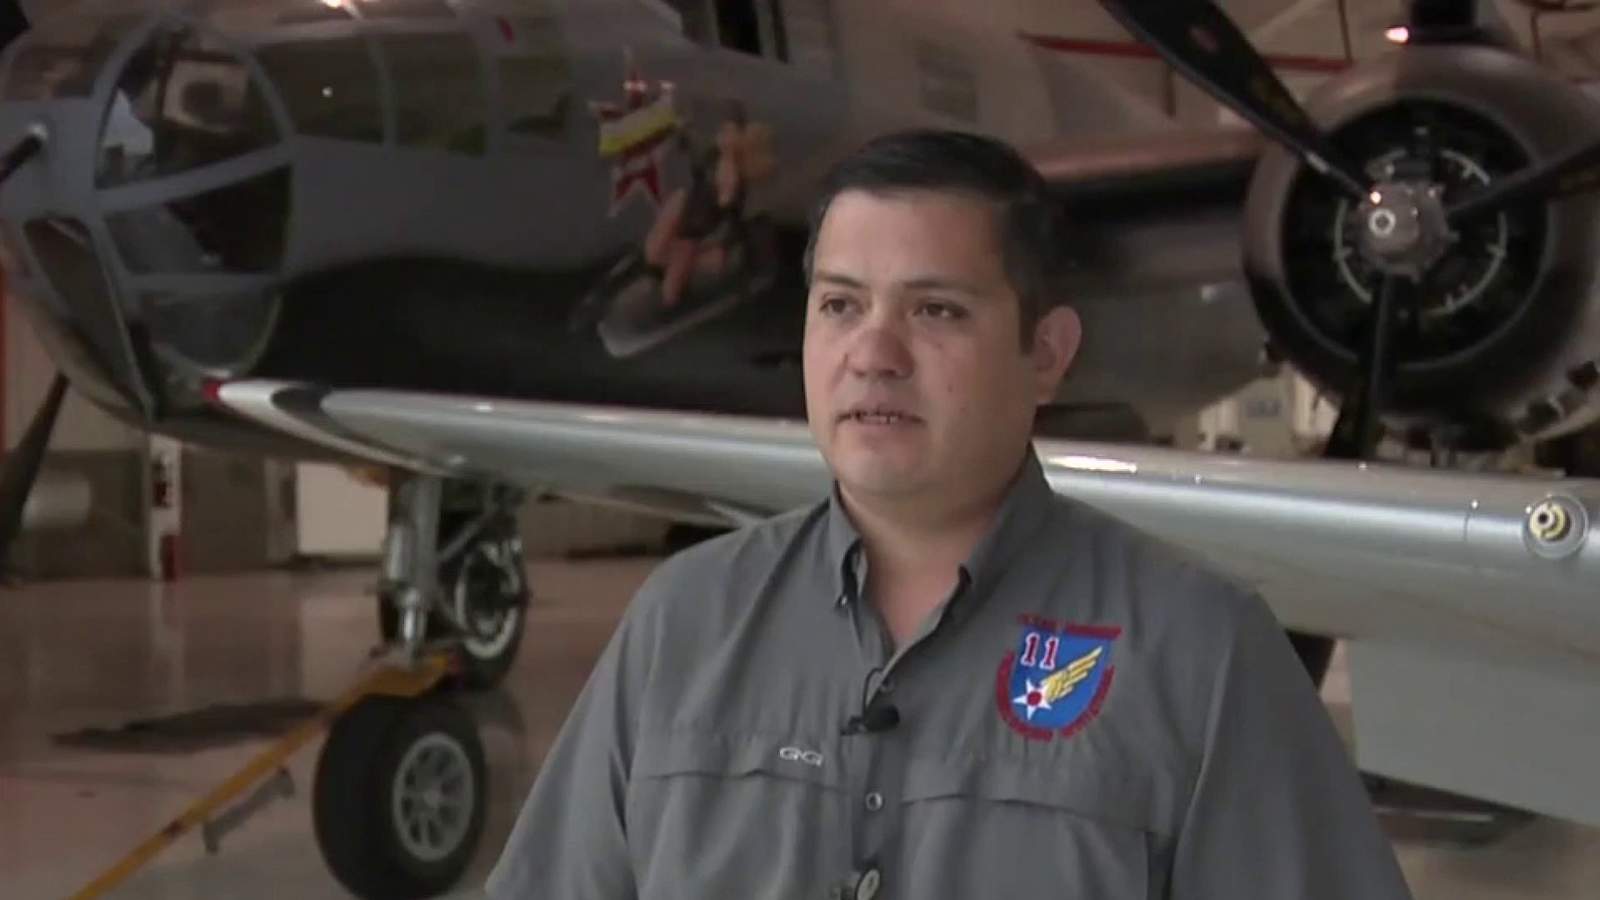 San Antonio born and raised pilot says Memorial Day flyover is incredibly special